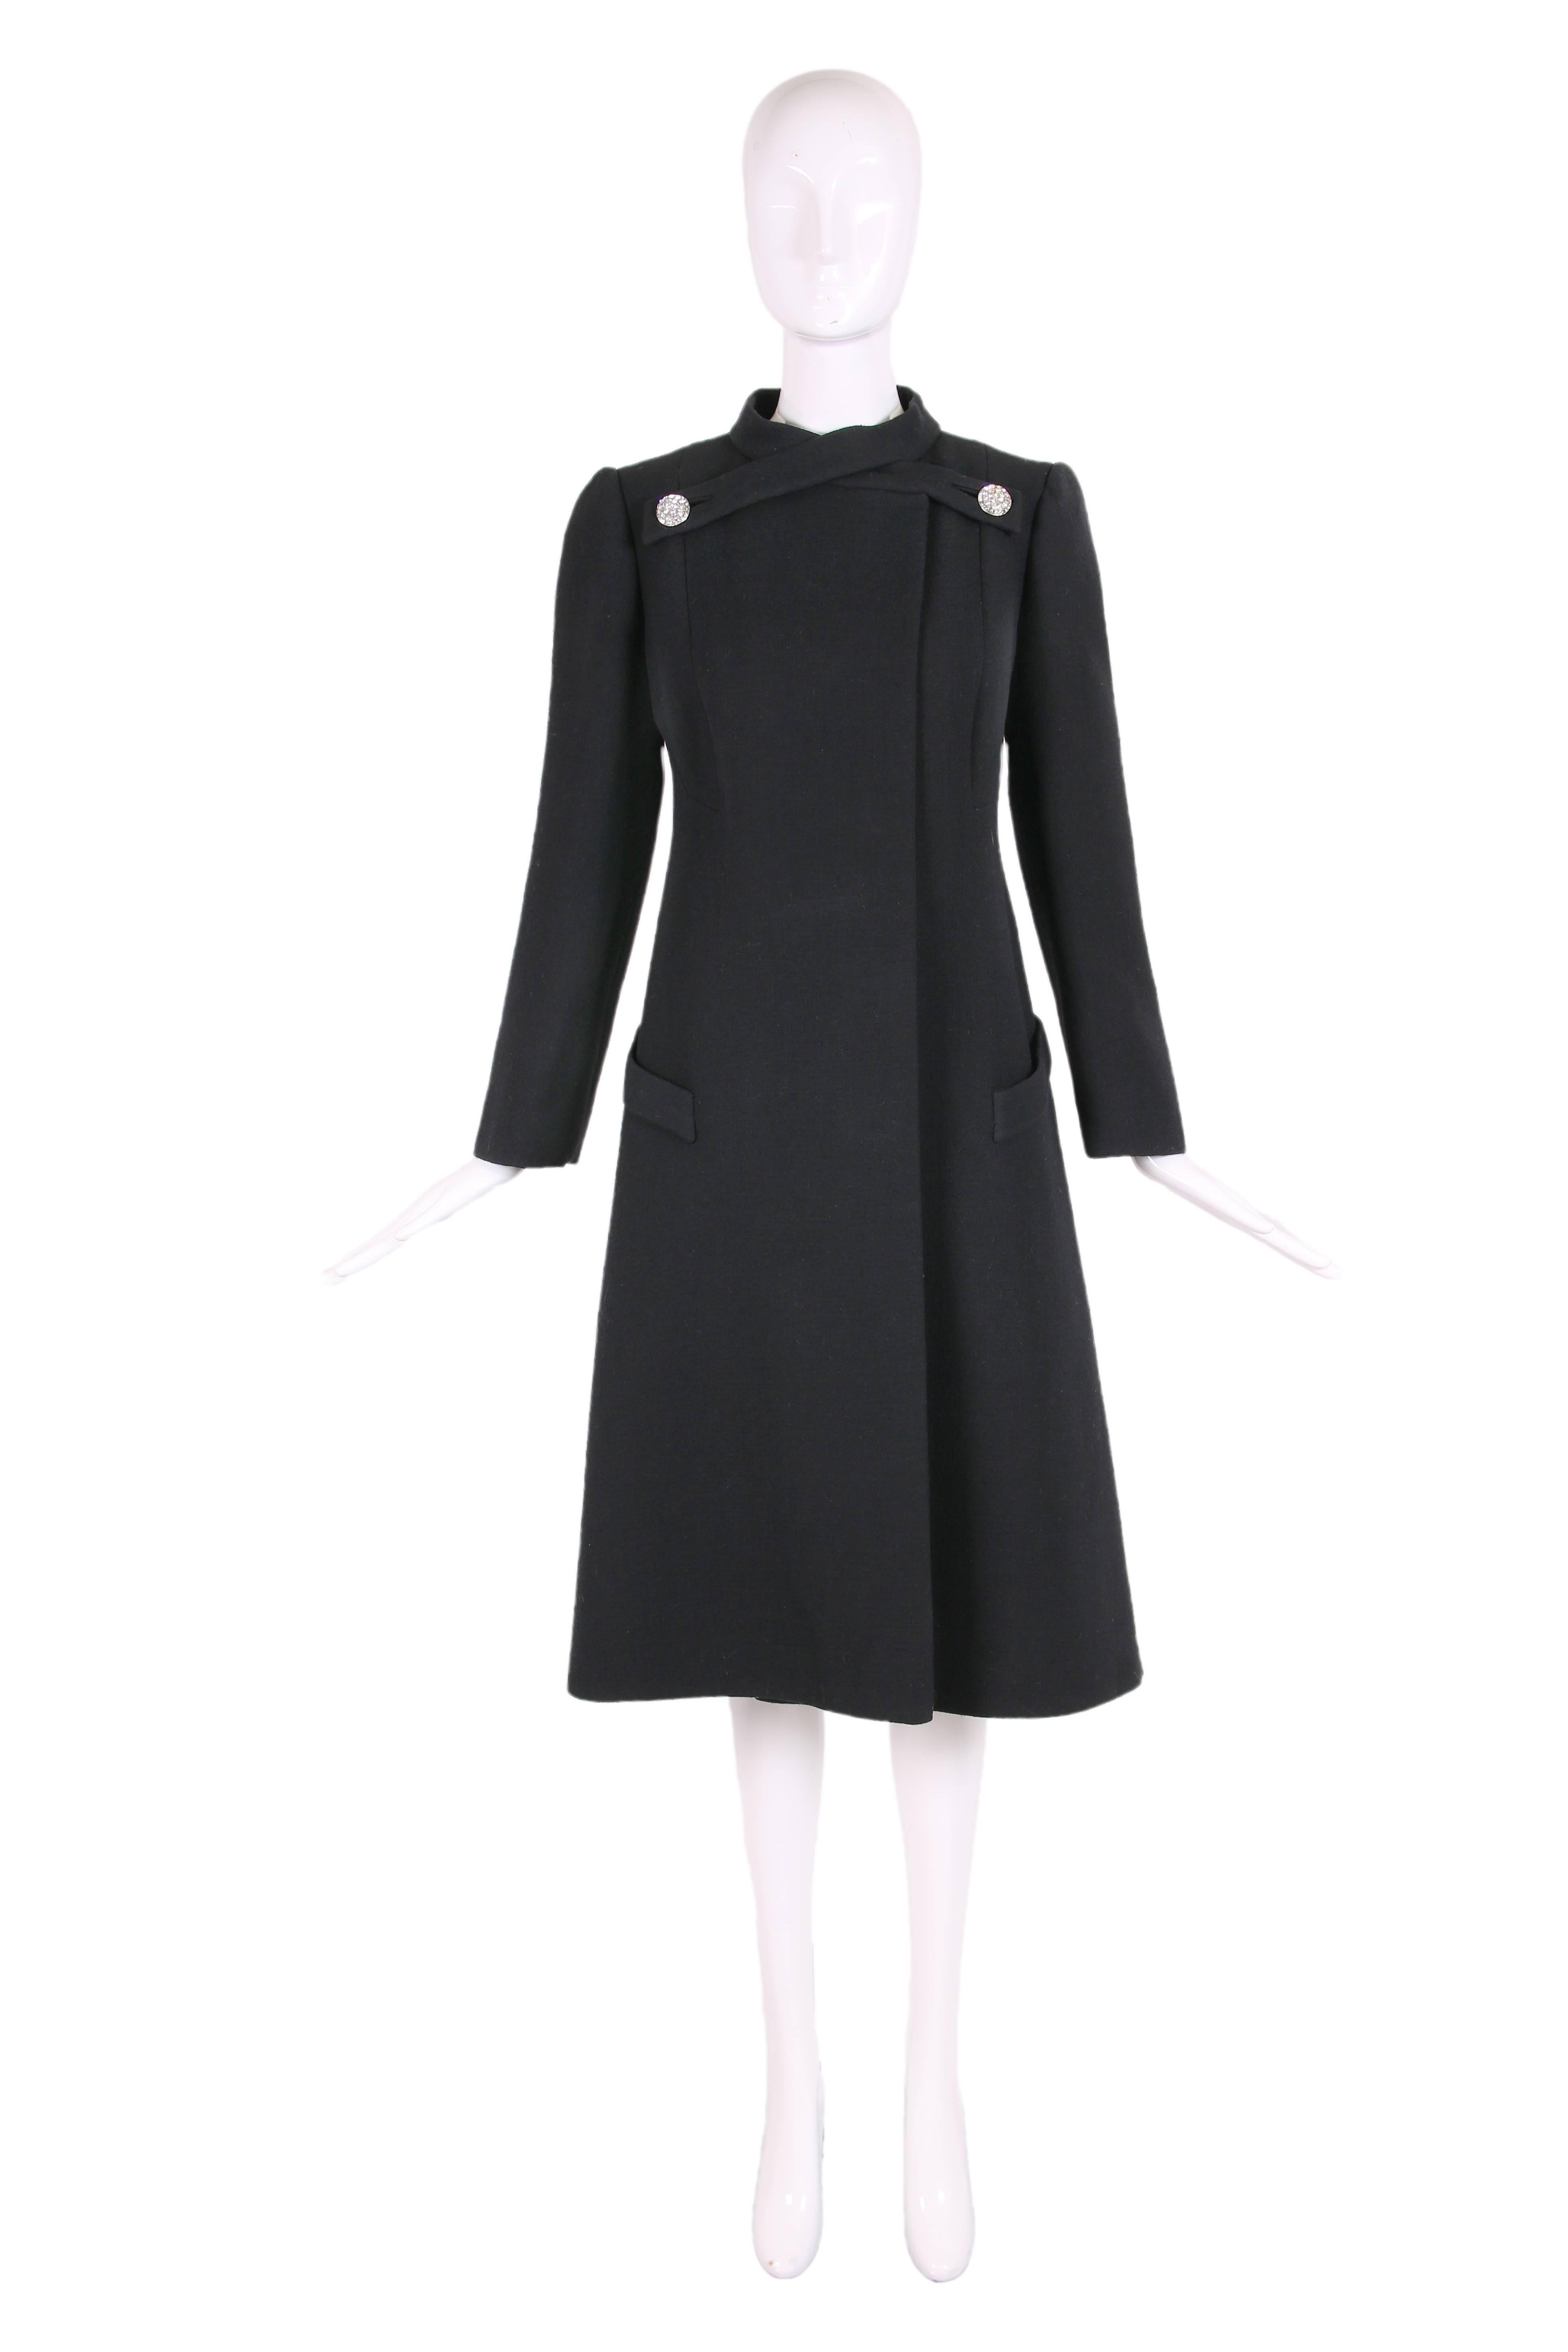 1970's Pauline Trigere black wool coat with criss-cross rhinestone button fastener at neckline - entirely lined in silk. In excellent condition - the rhinestone buttons at the back are not original. No size tag - please consult